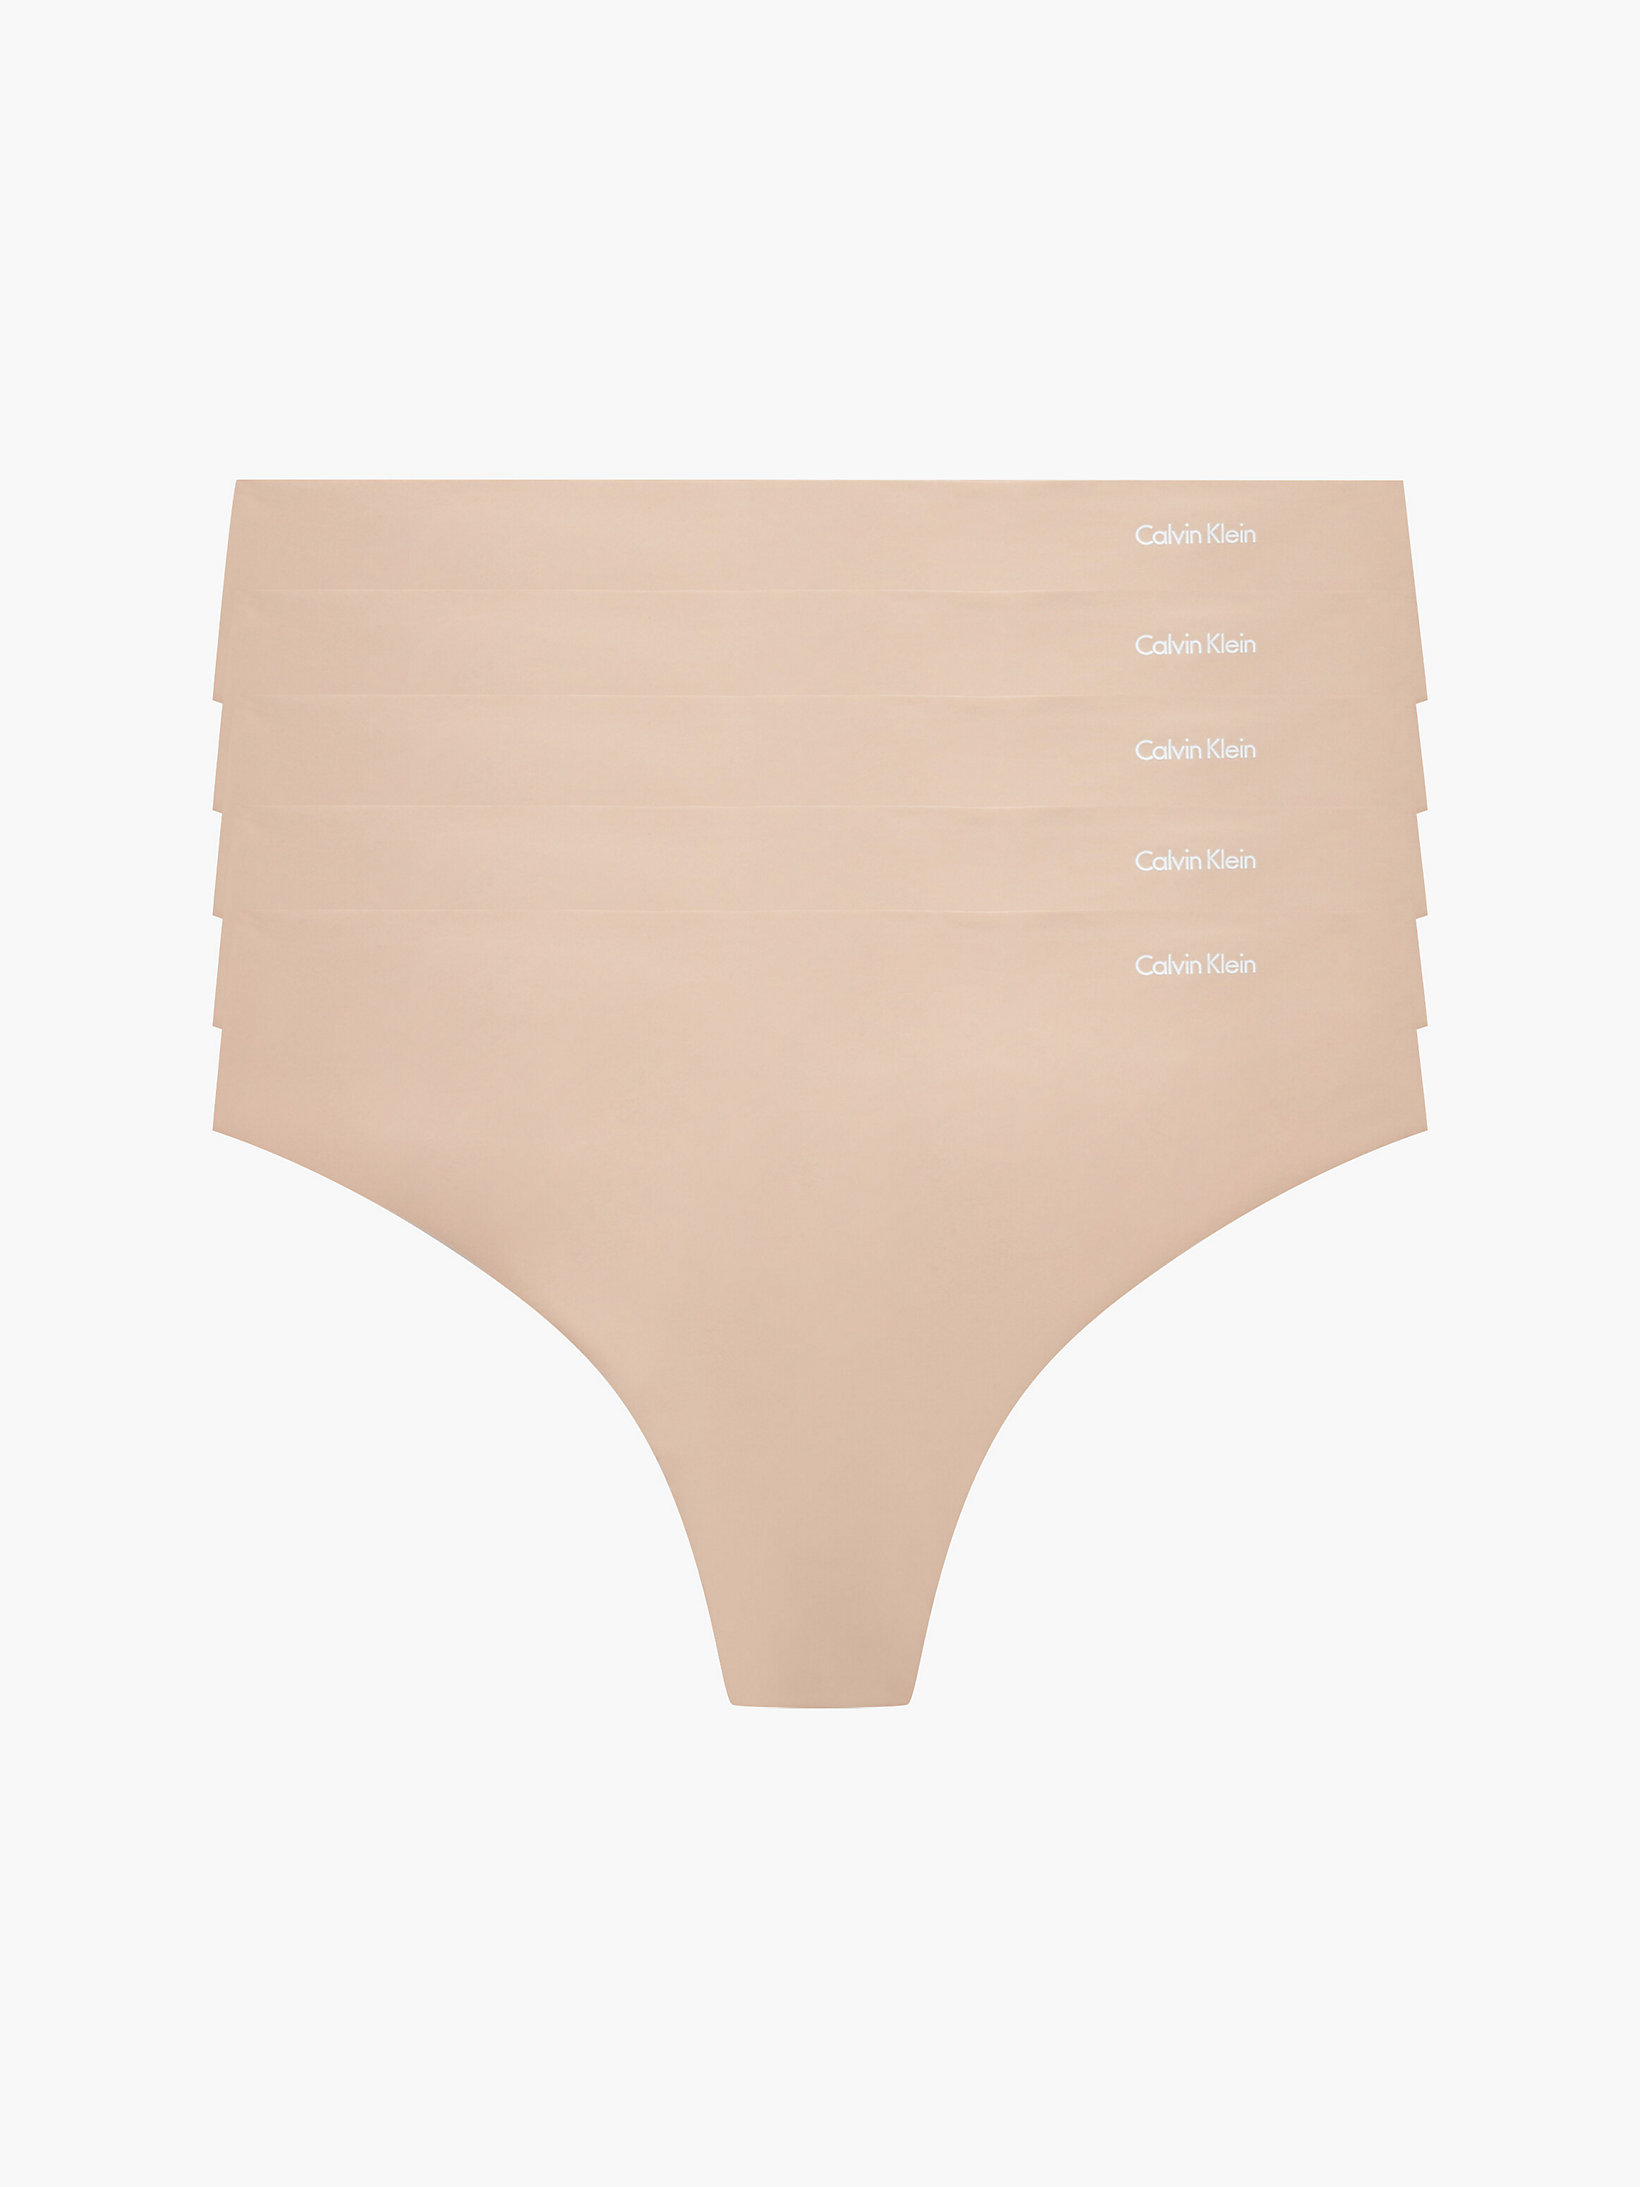 Light Caramel 5 Pack Thongs - Invisibles undefined women Calvin Klein